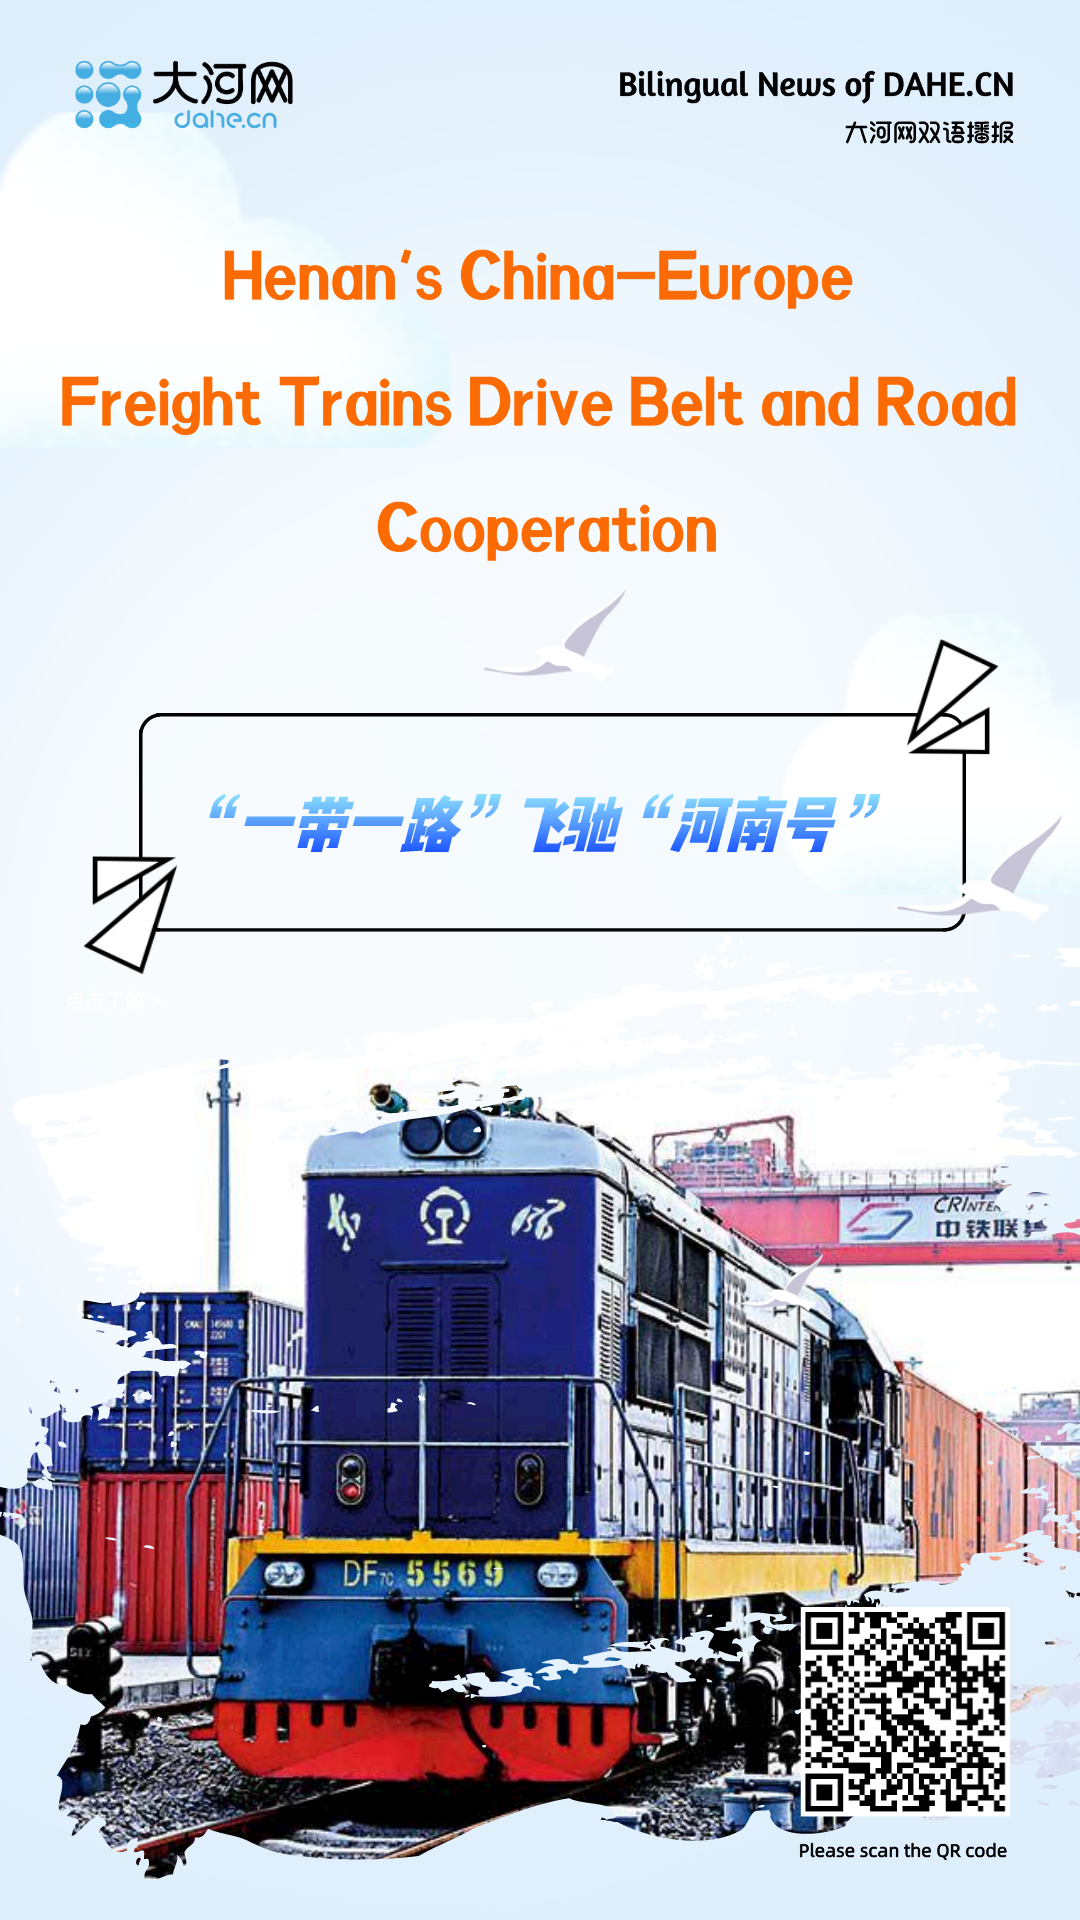 Henan's China-Europe Freight Trains Drive Belt and Road Cooperation